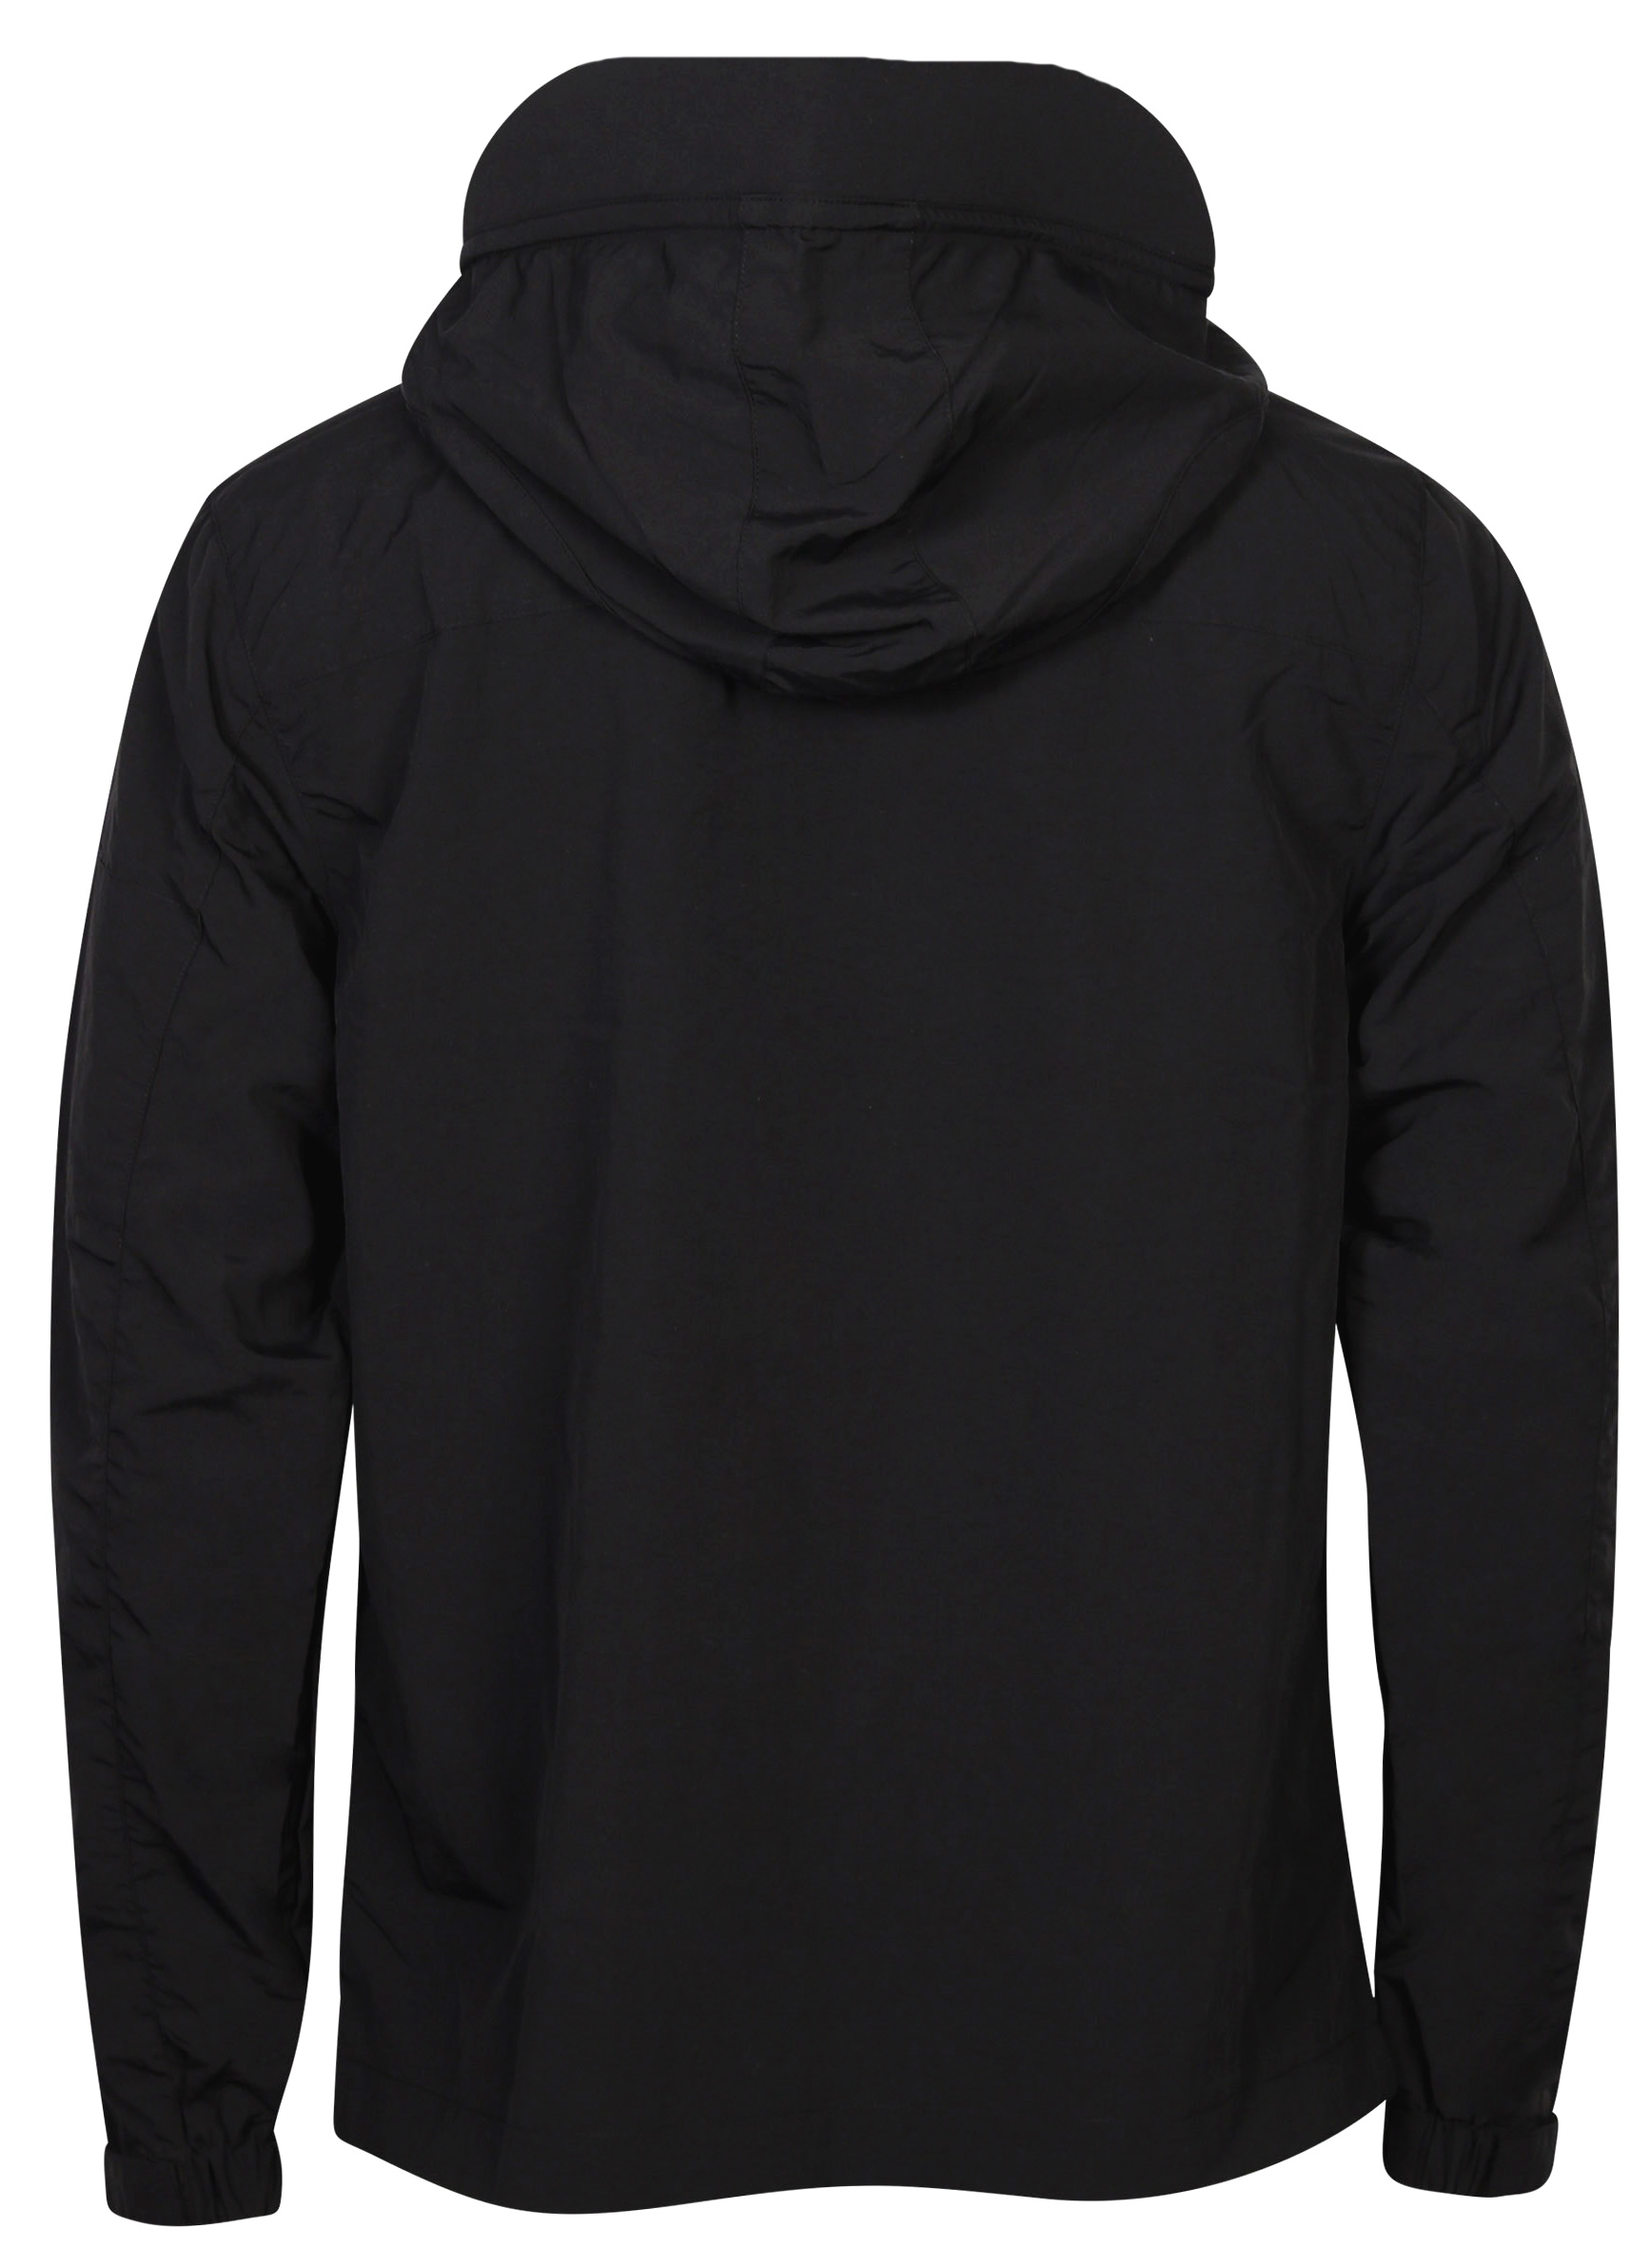 A-Cold-Wall Hooded Stormjacket Black